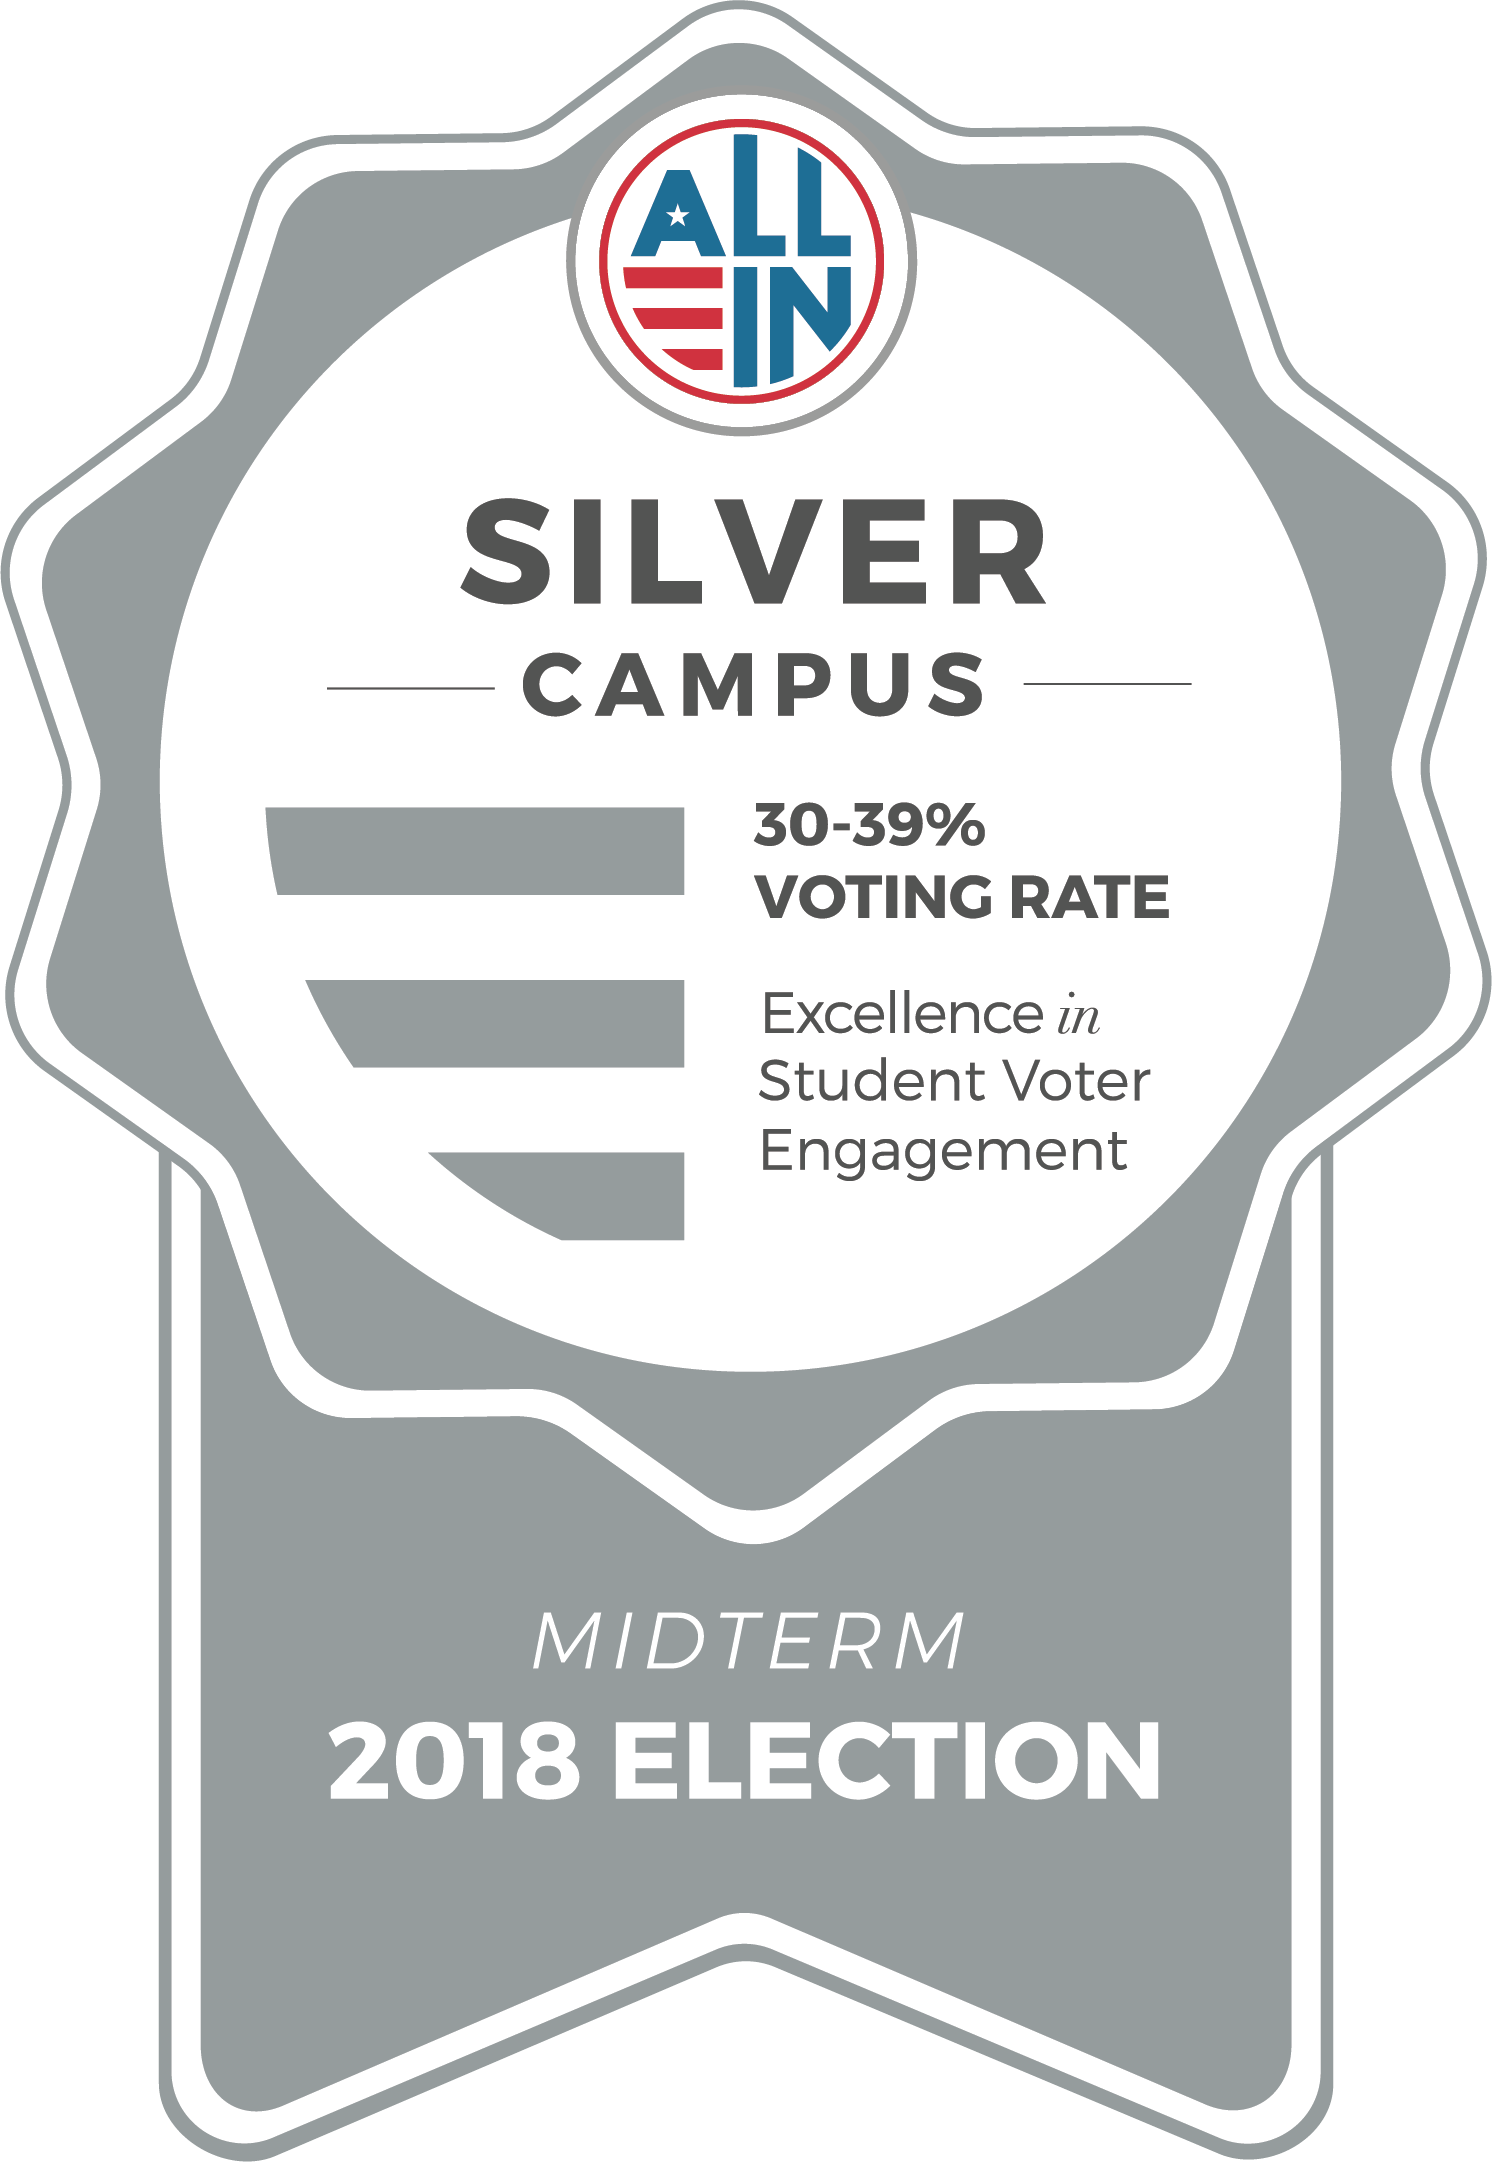 All In Silver Campus 30-39% voting rate. Excellence in Student Voter Engagement. Midterm 2018 Election.